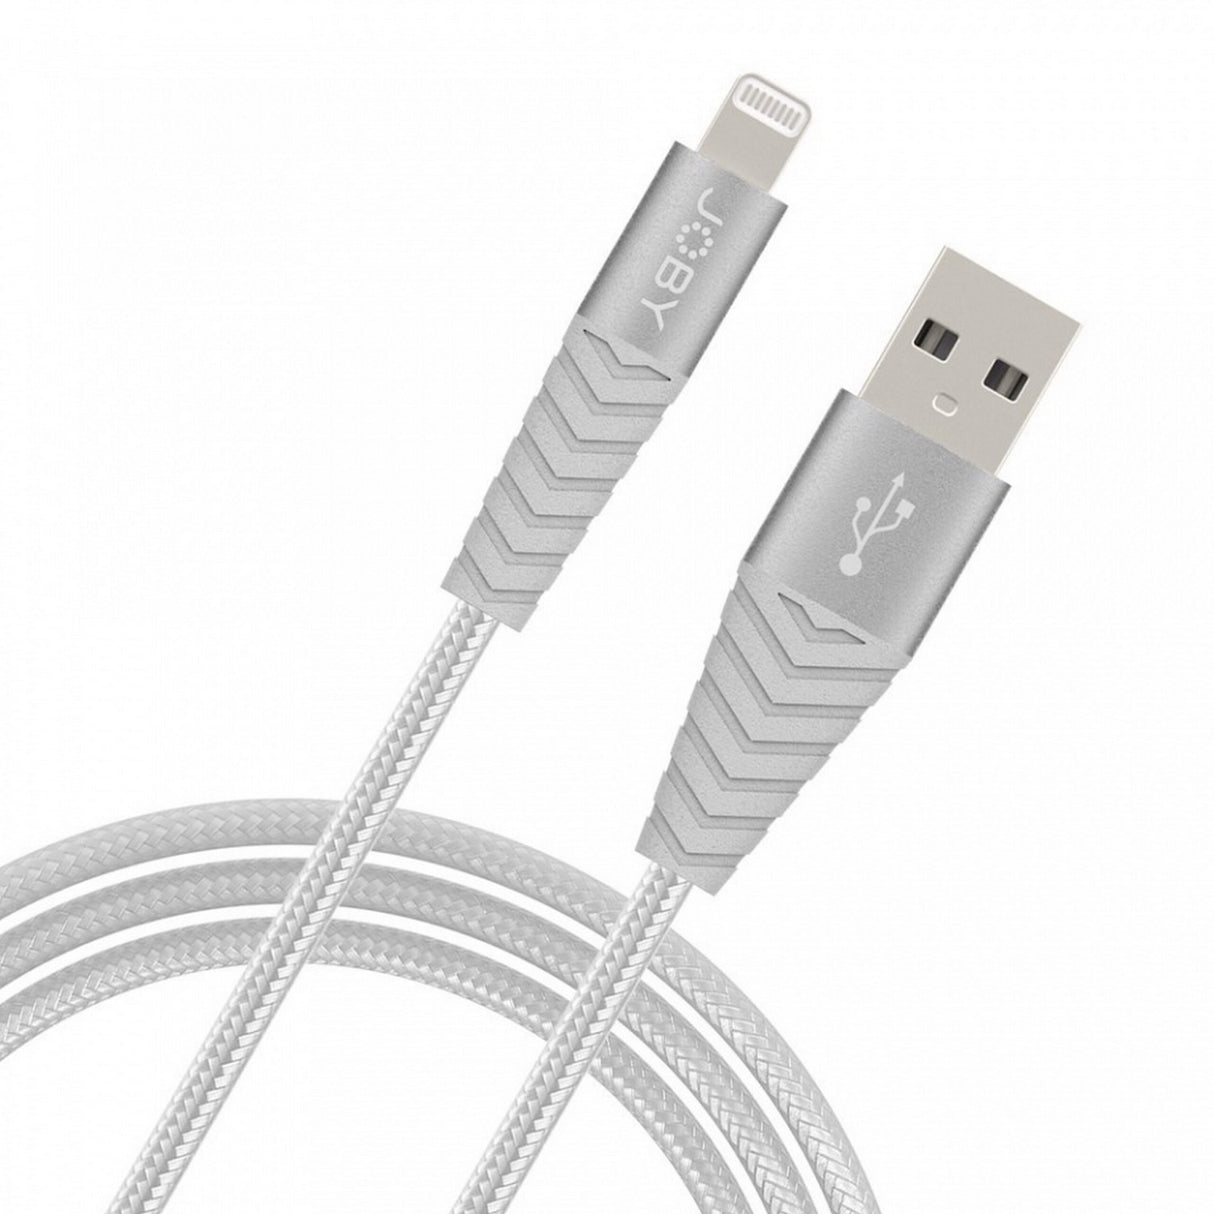 Joby JB01814 Charge and Sync Lightning Cable, 1.2-Meter, Silver